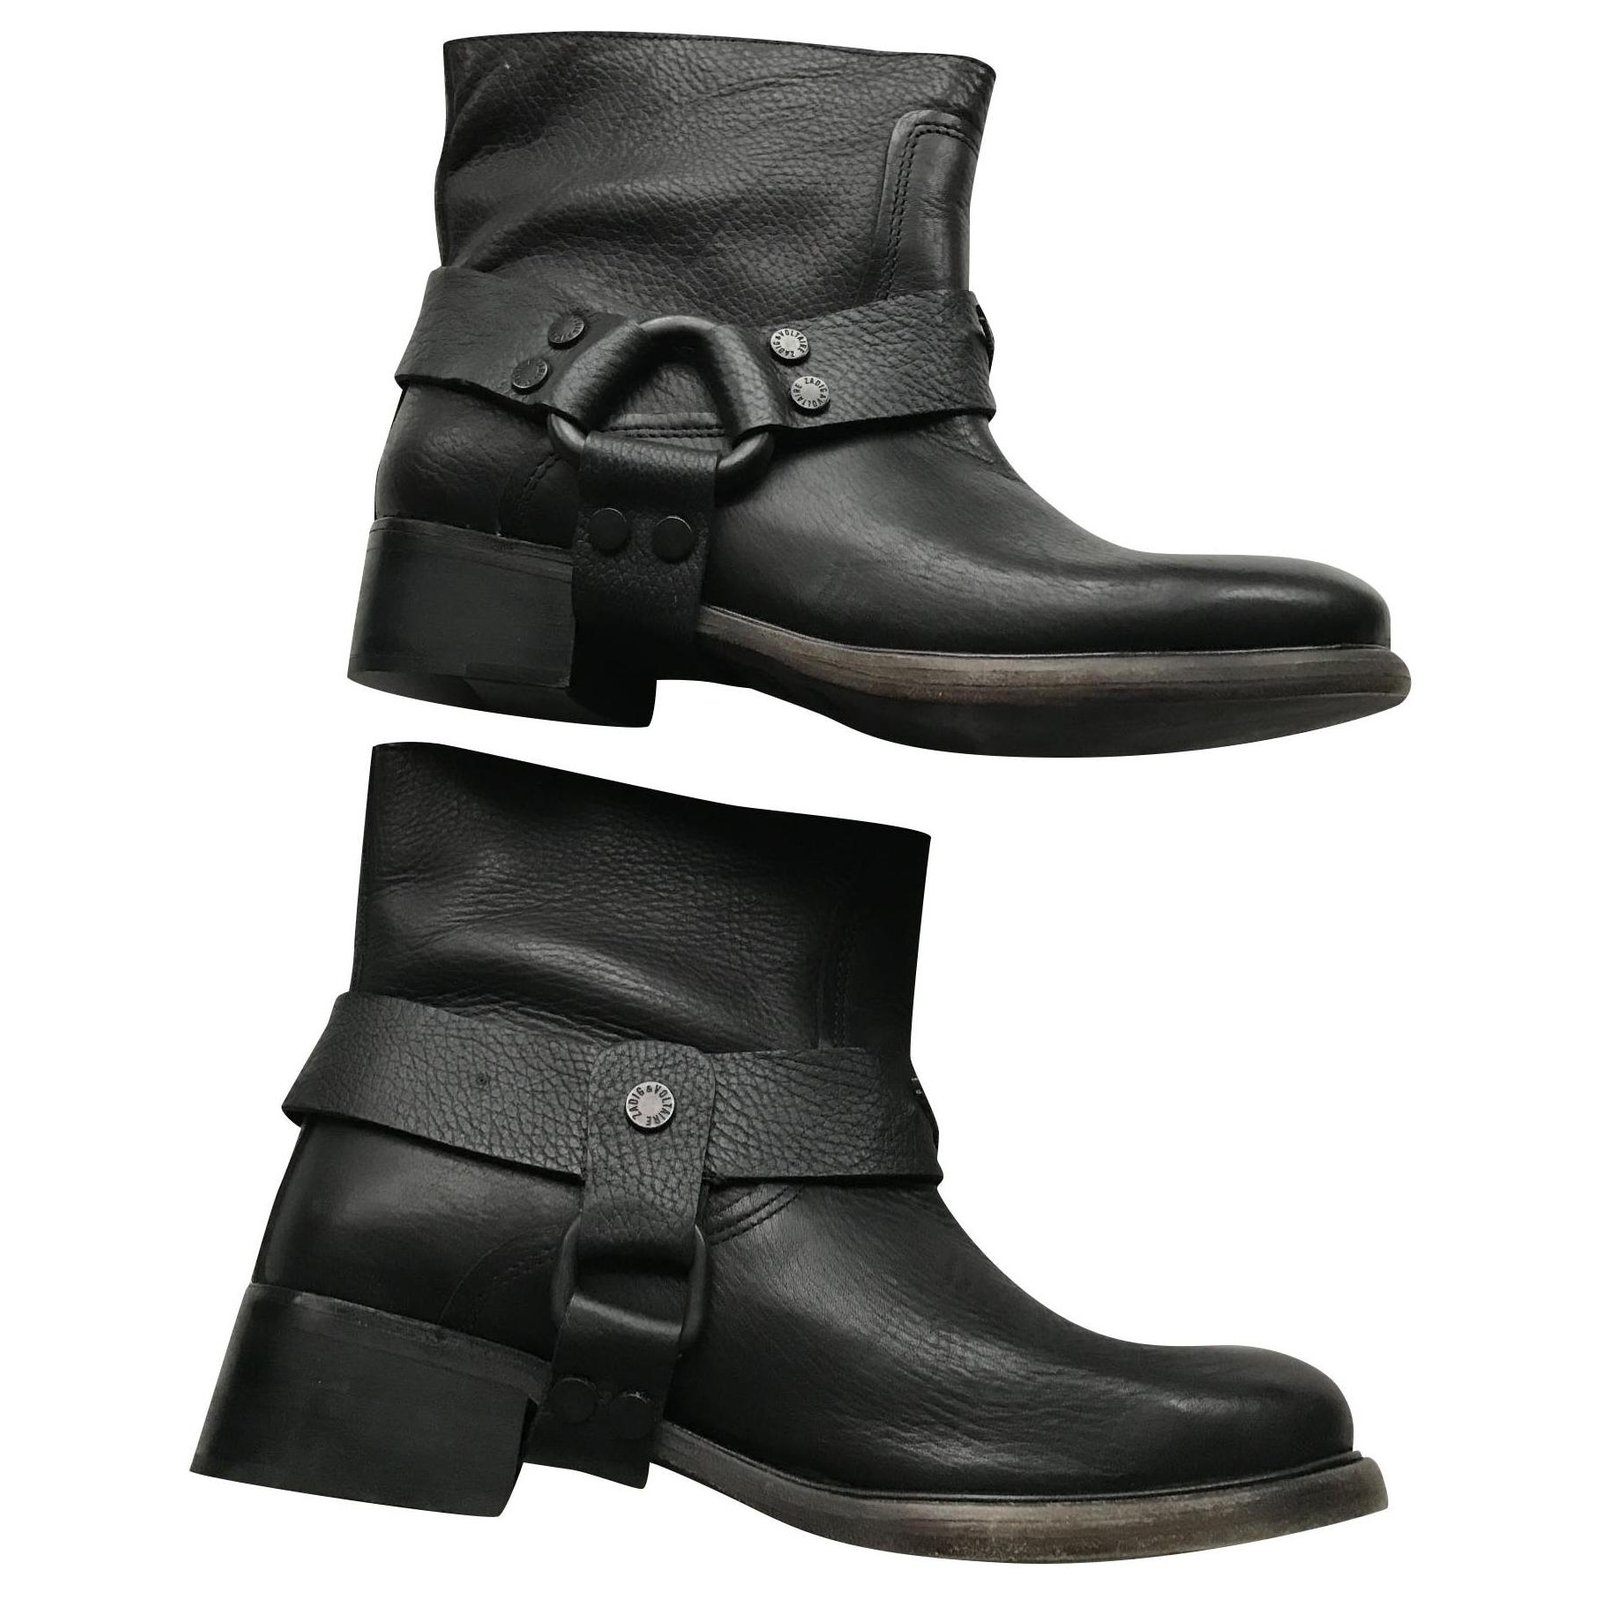 leather biker style boots